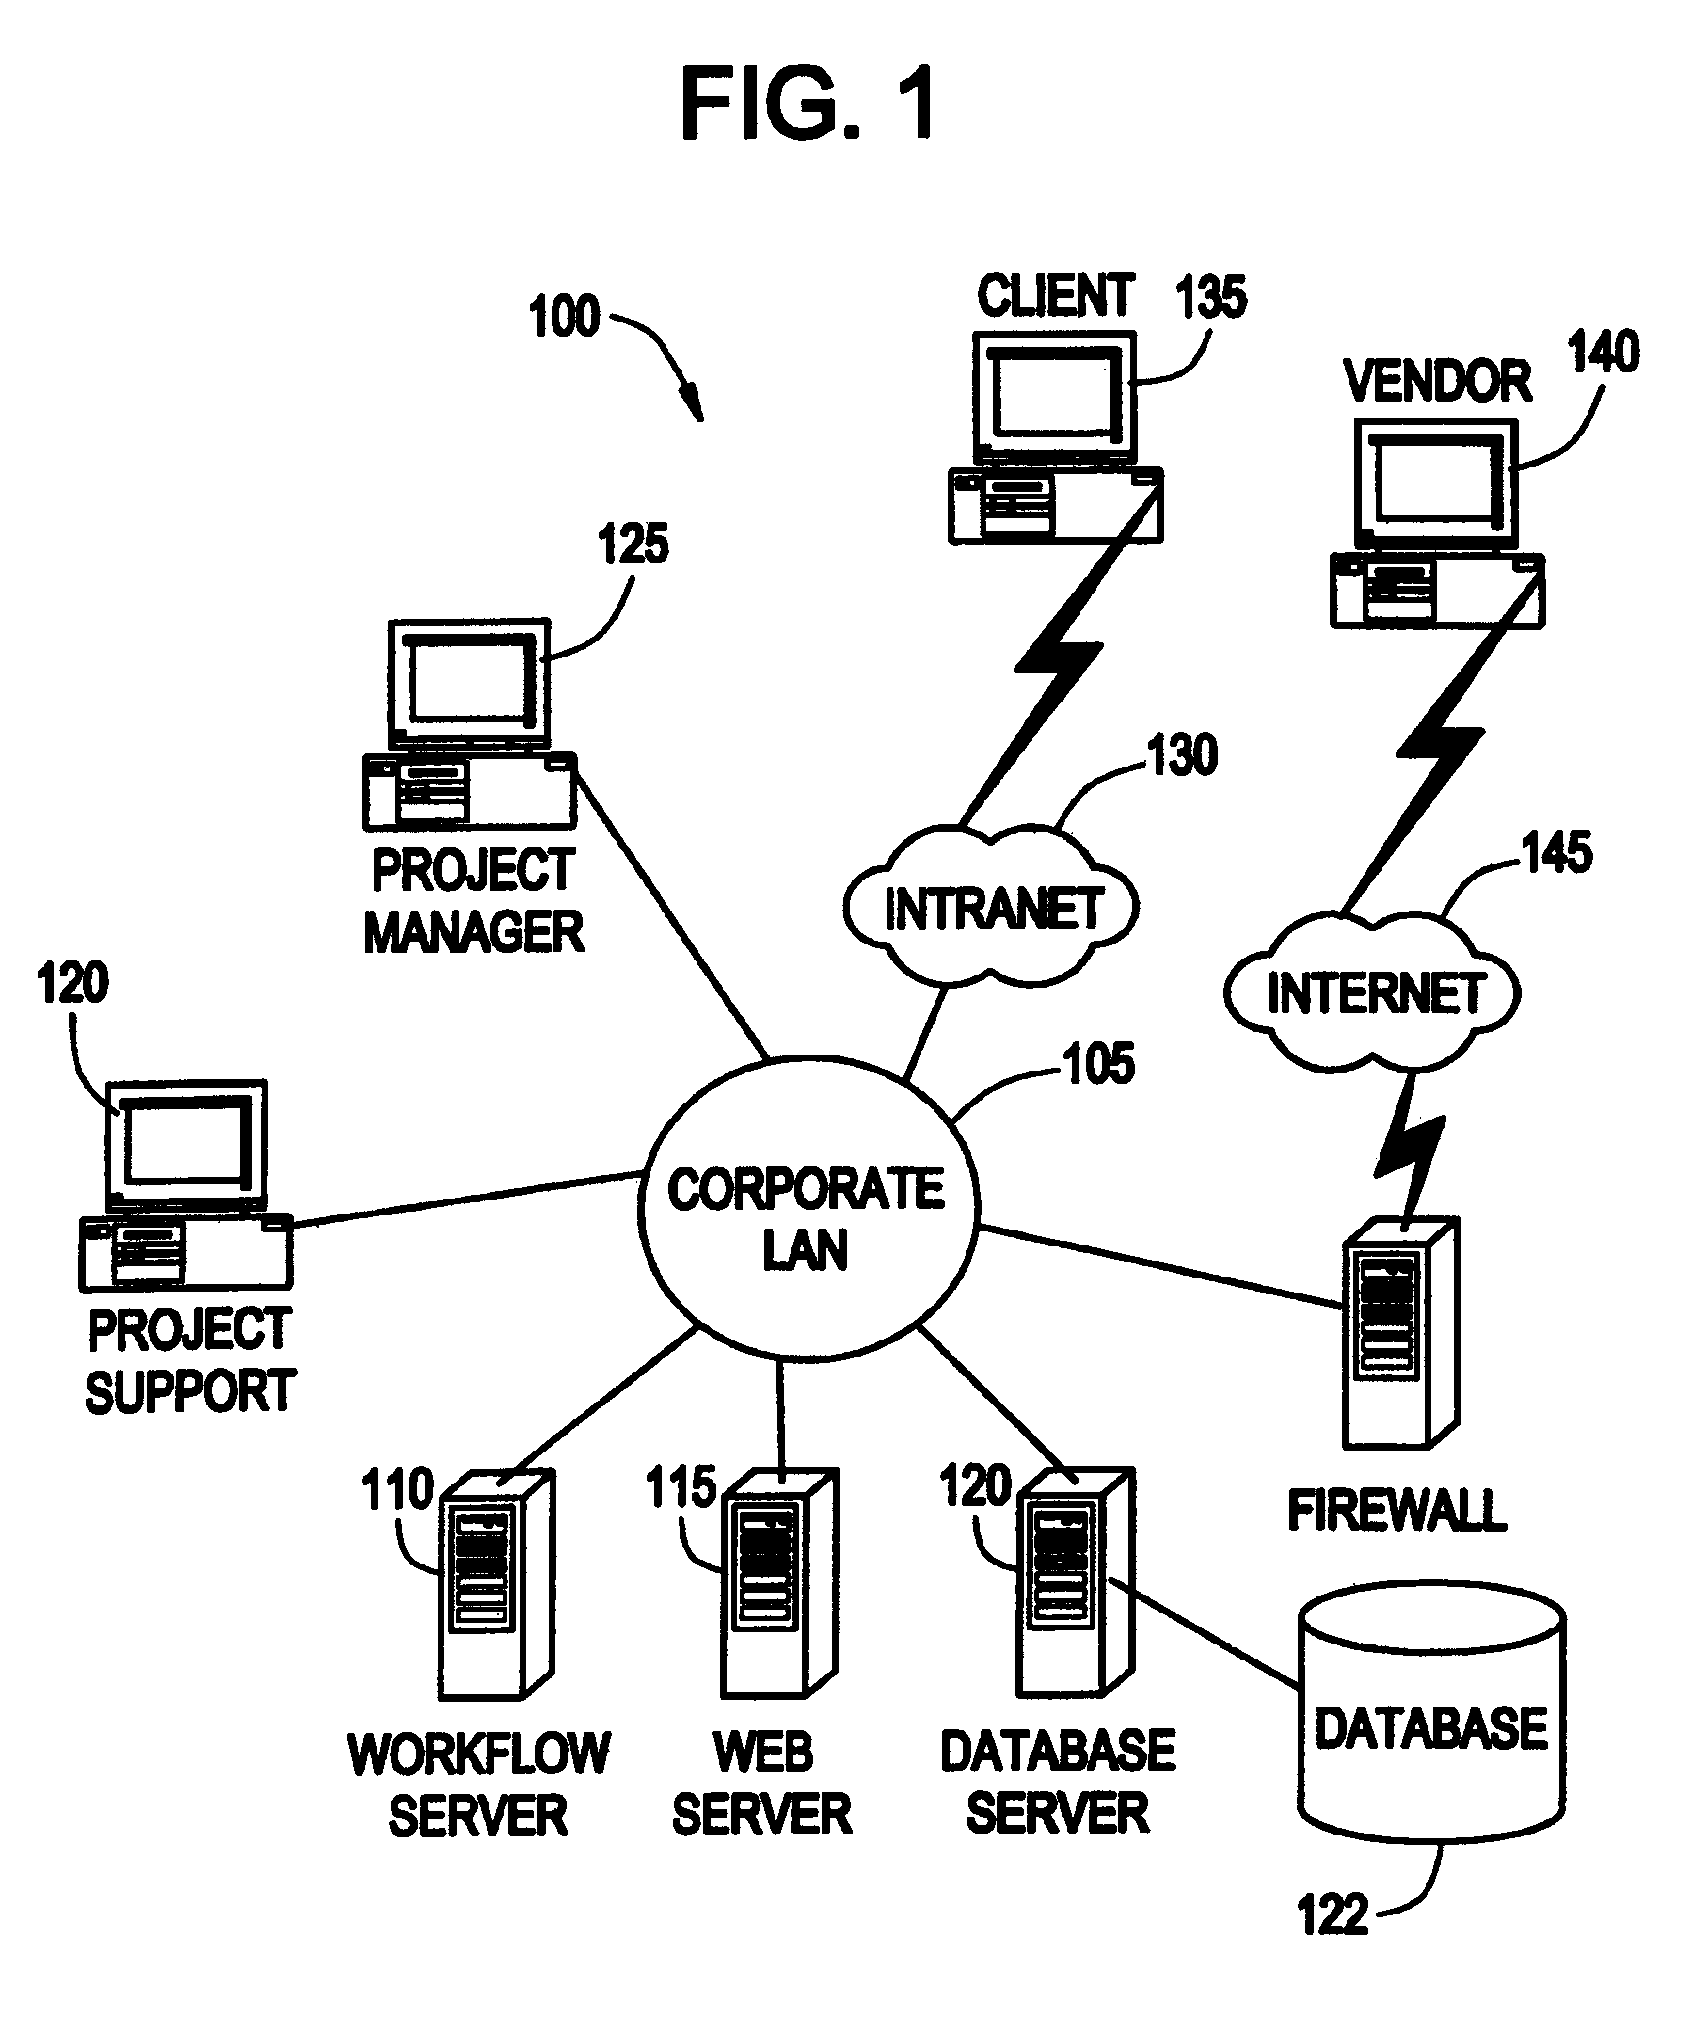 System and method for providing funding approval associated with a project based on a document collection